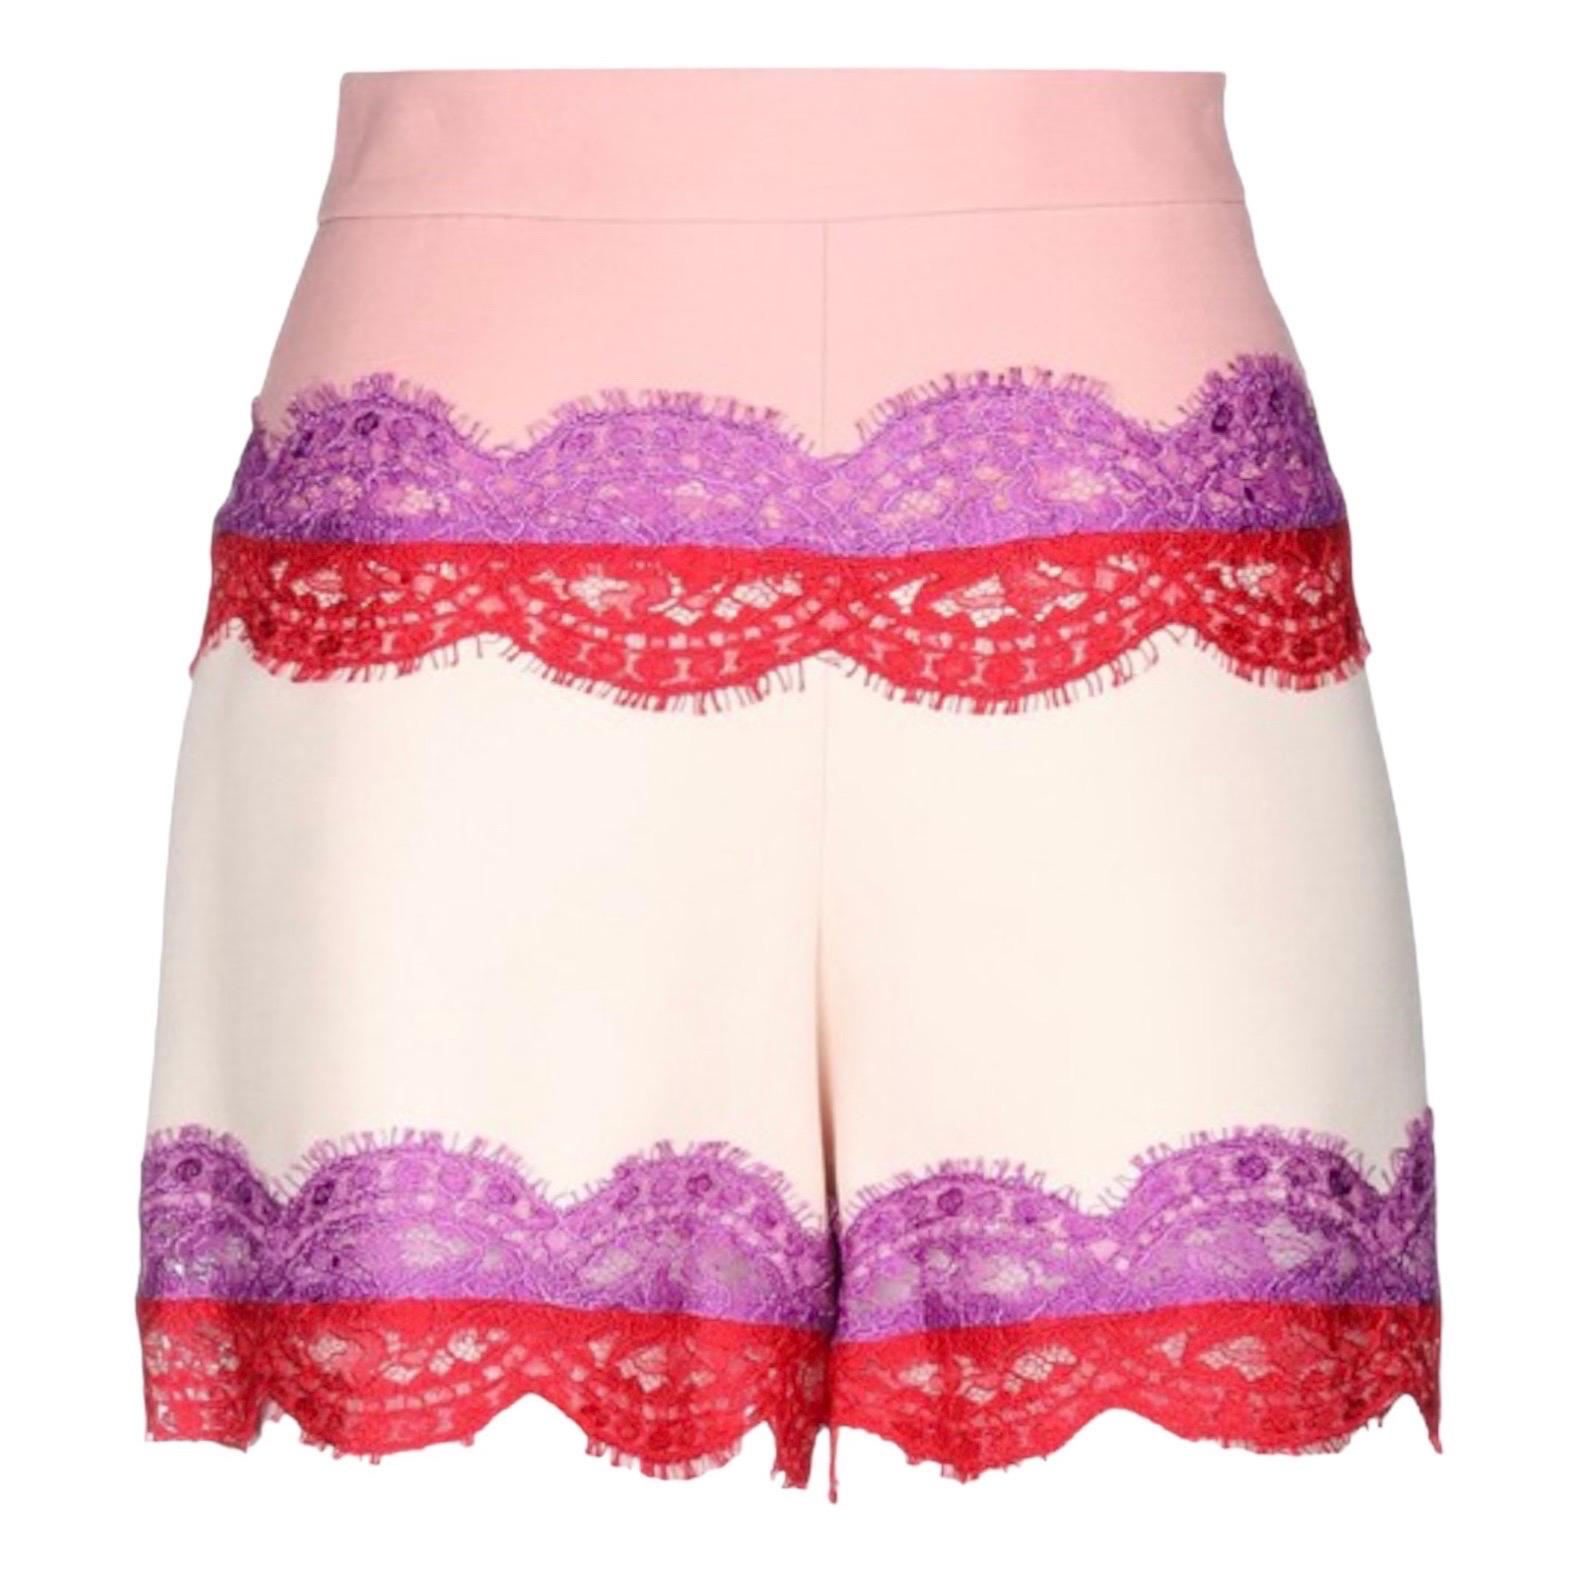 Wonderful shorts by Emilio Pucci
Blush & offwhite colors
Purple & Red lace trimmings
Closes on side with hidden zip
Size 44
Retails for 789$ plus taxes
Dry clean only
Made in Italy